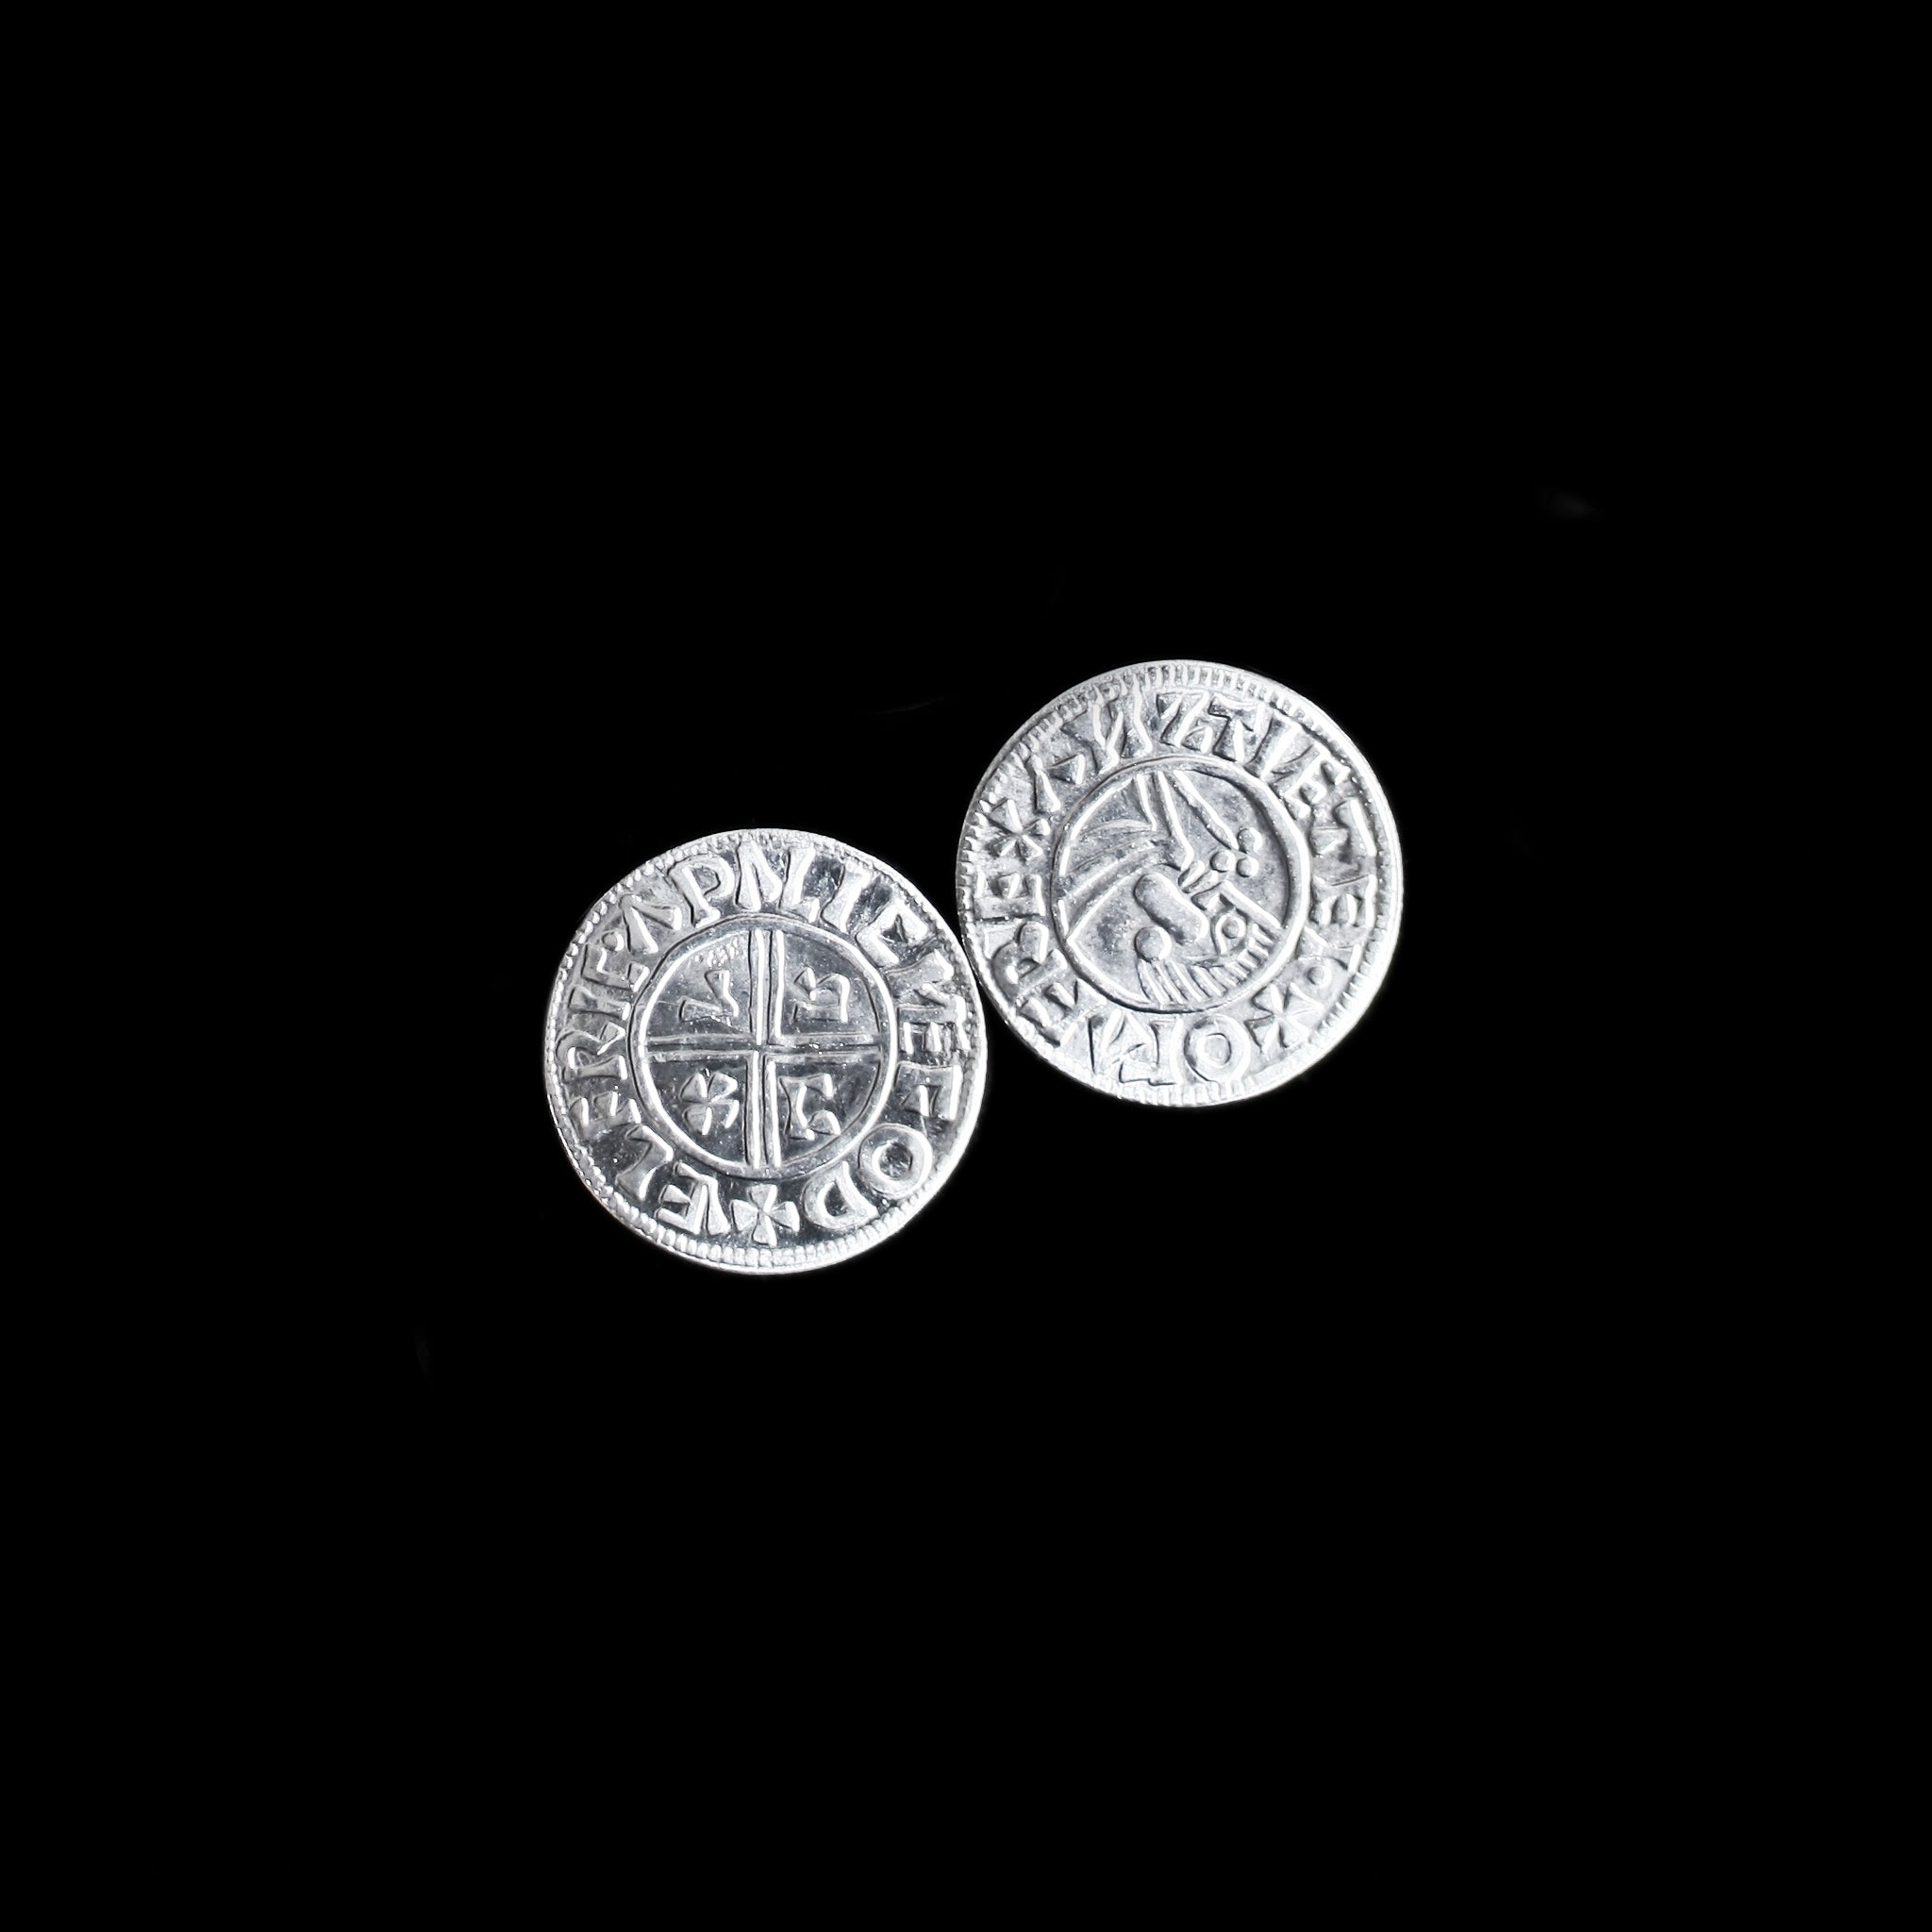 Aethelred Replica Saxon Coins from Winchester